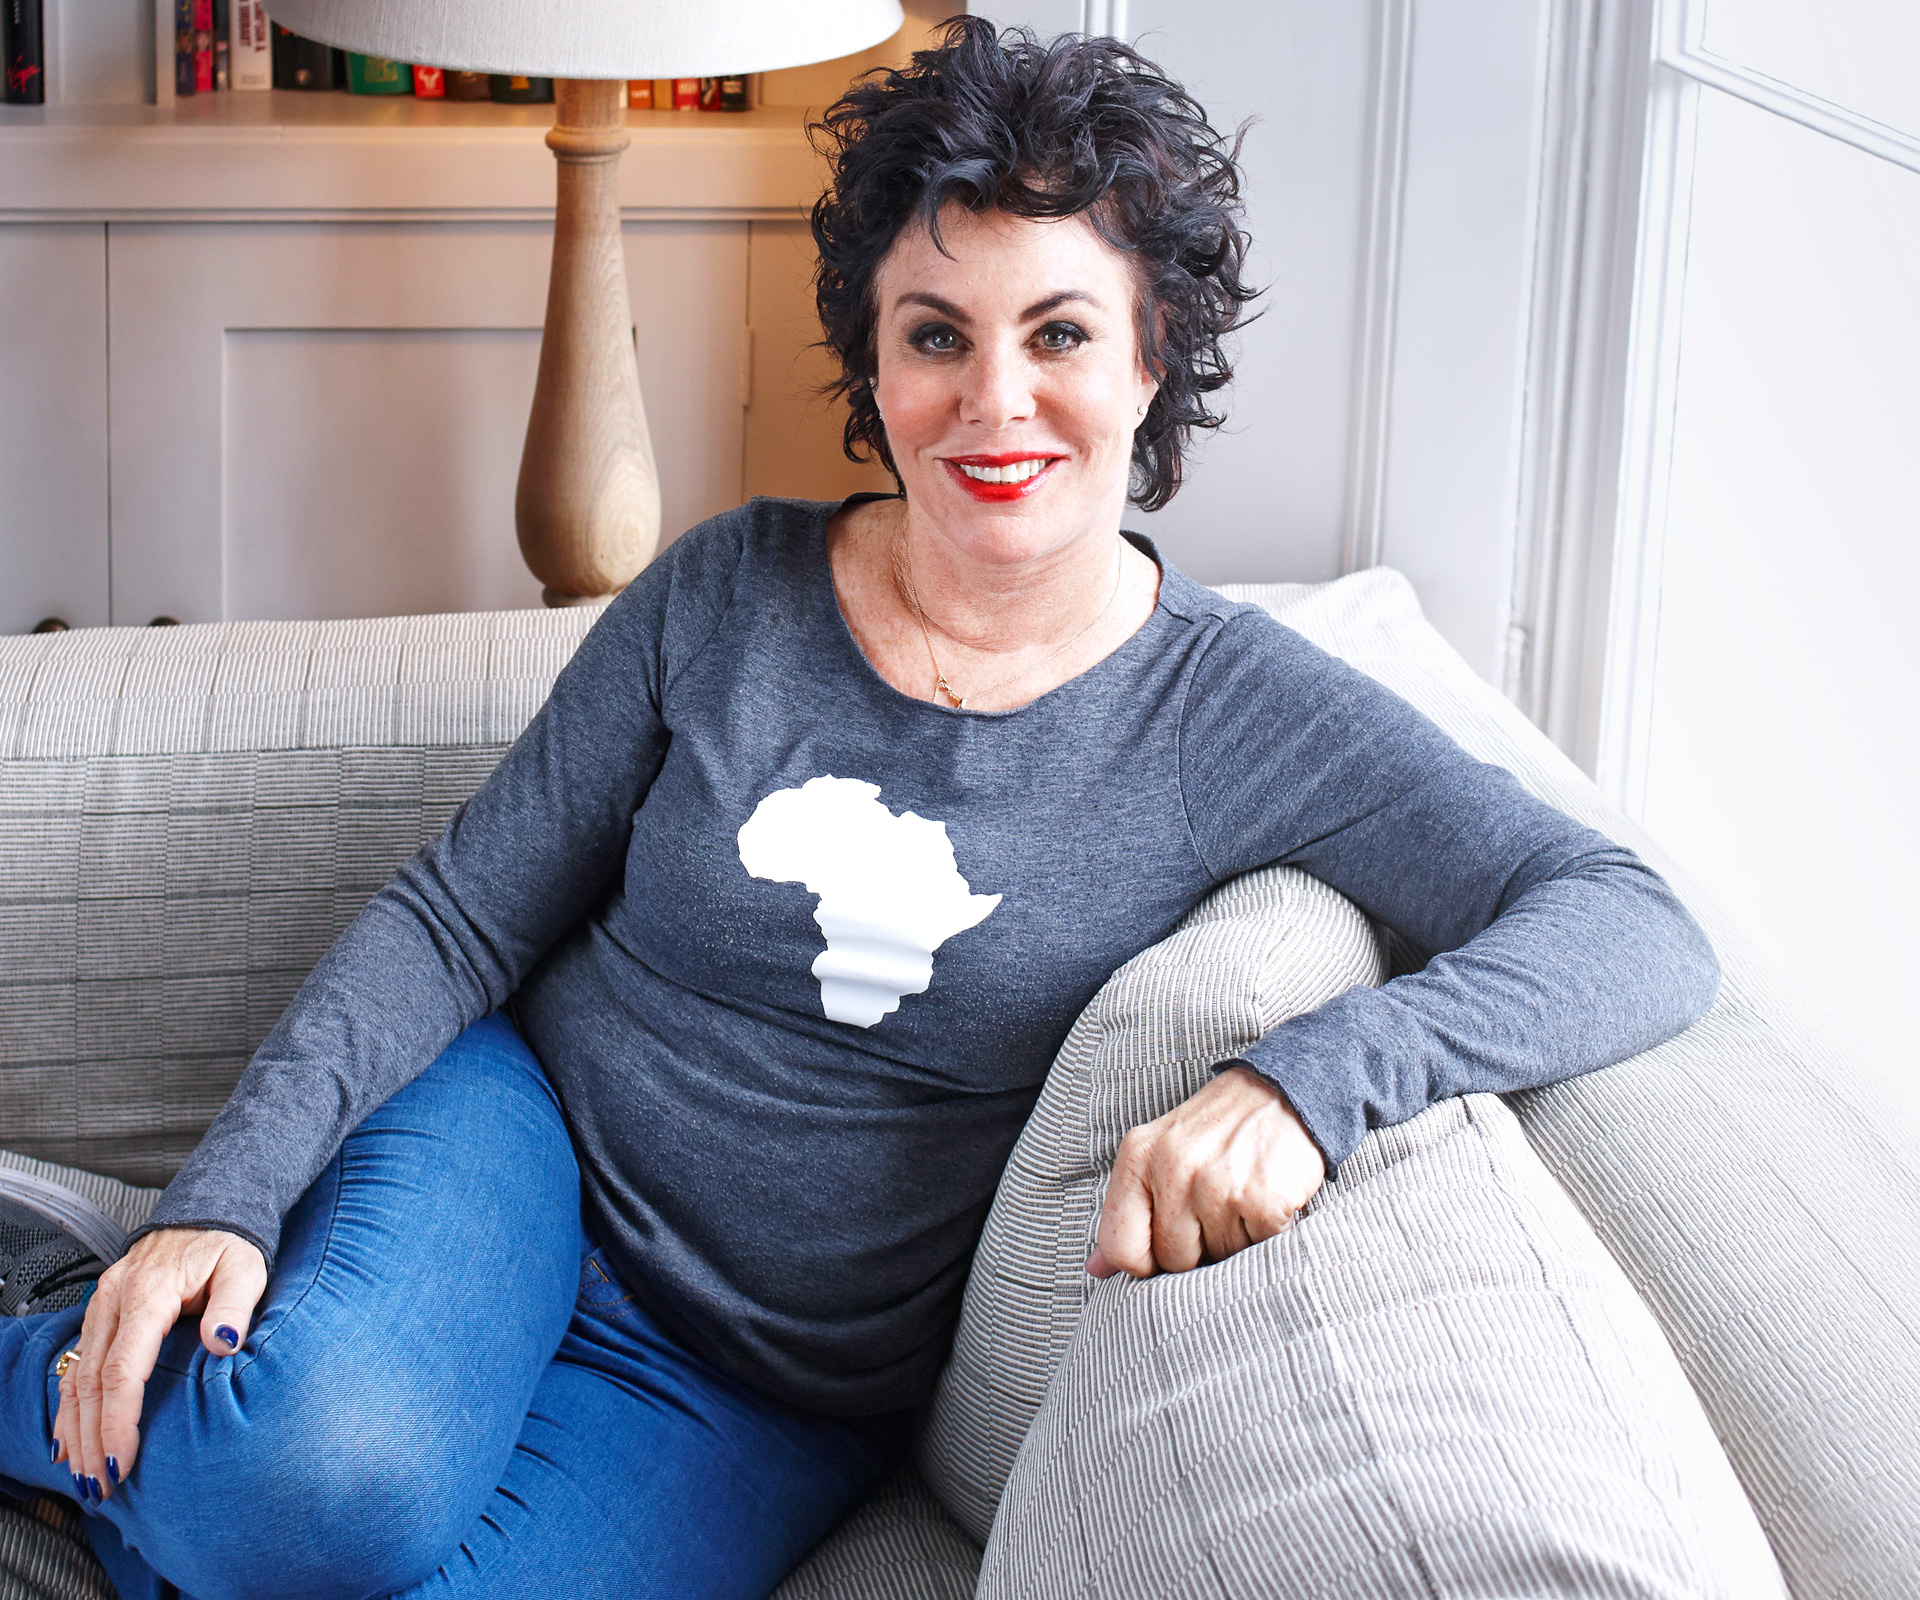 Why mindfulness matters to Ruby Wax